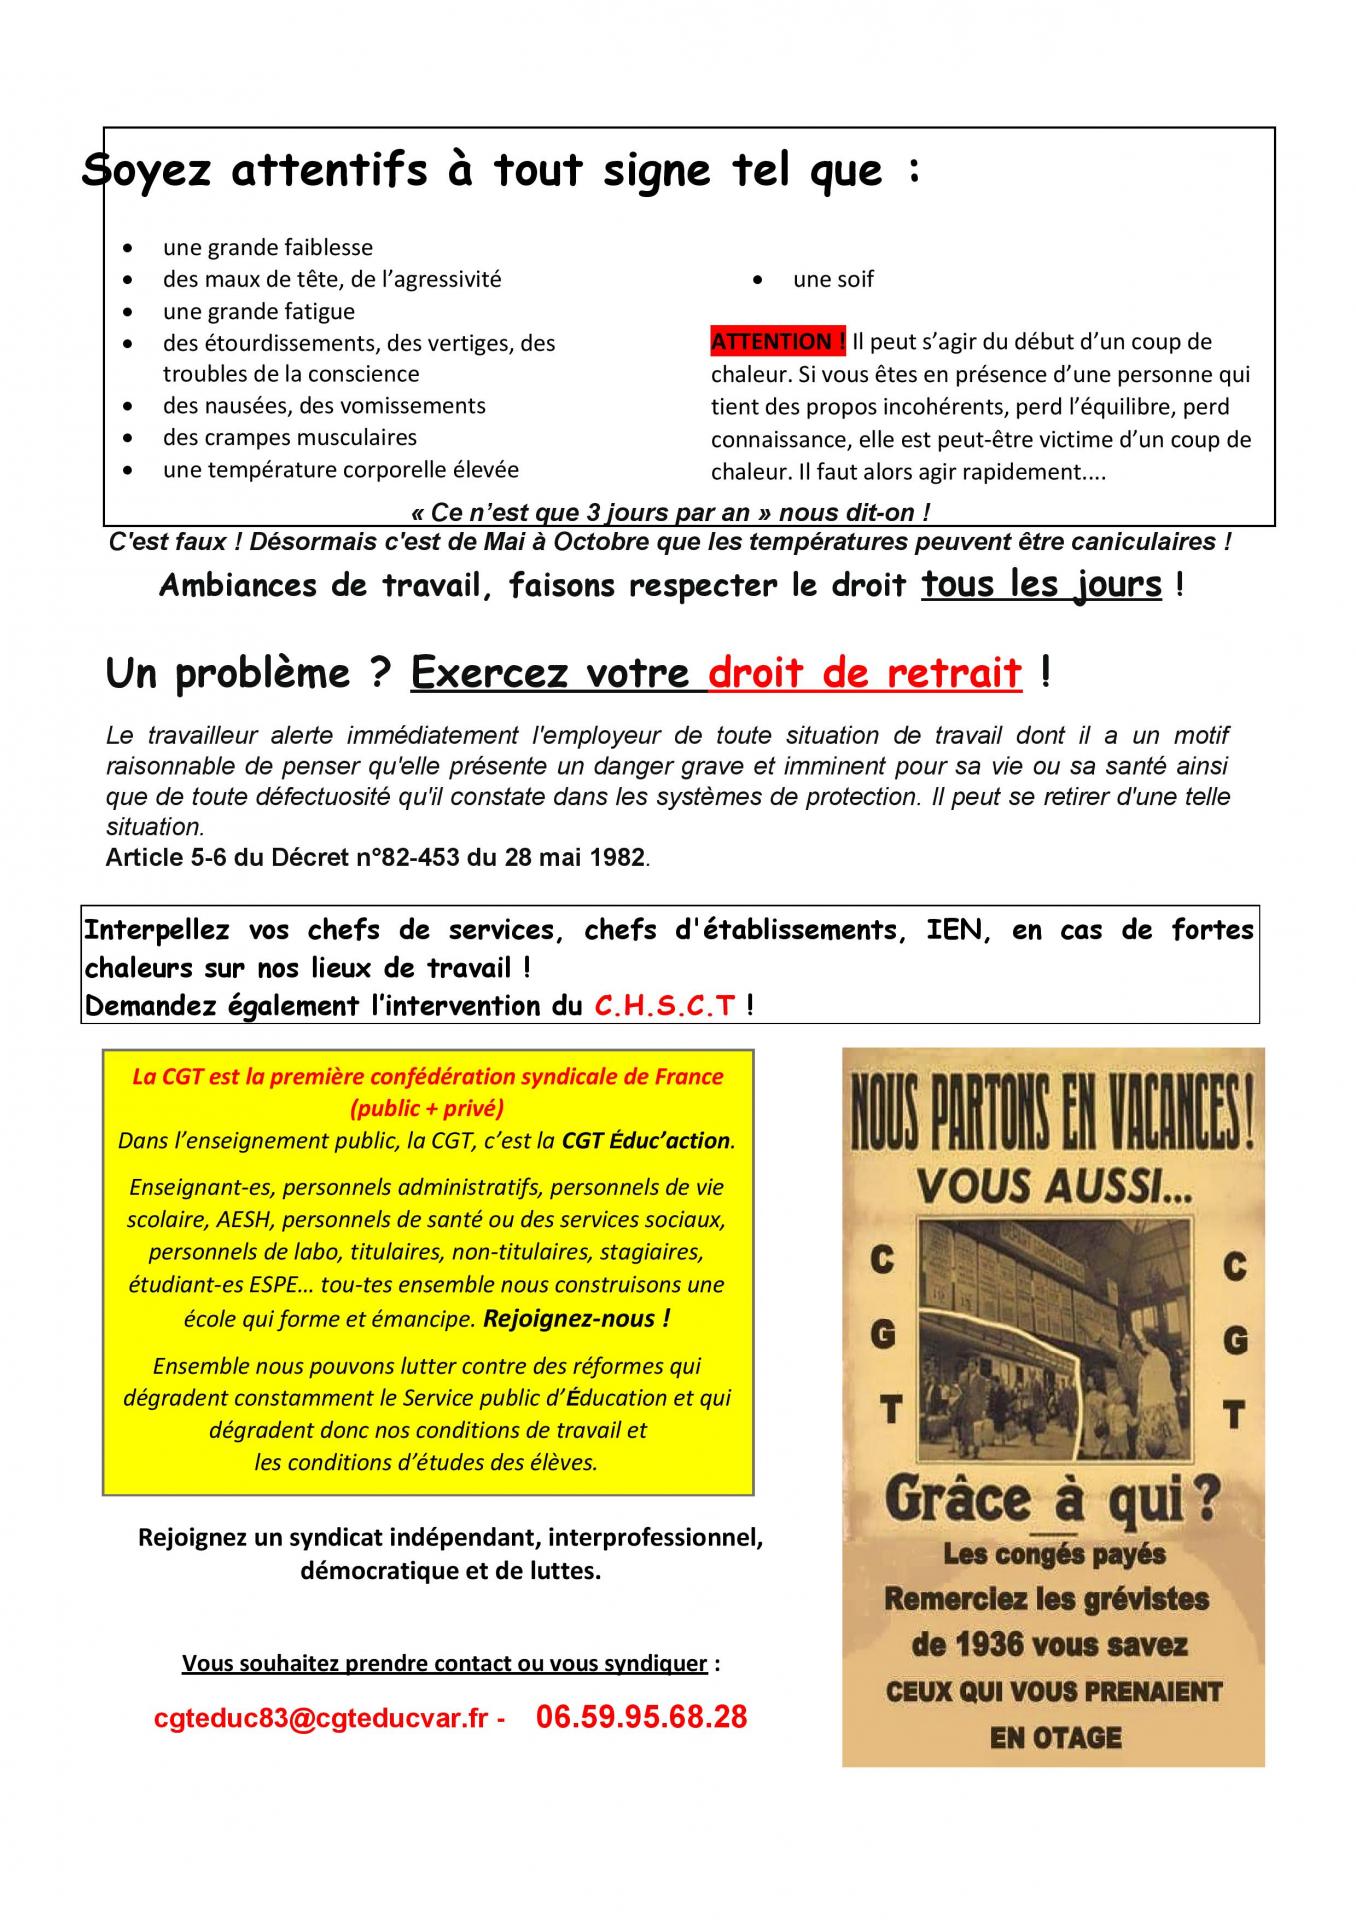 Cgt tract canicule page 002